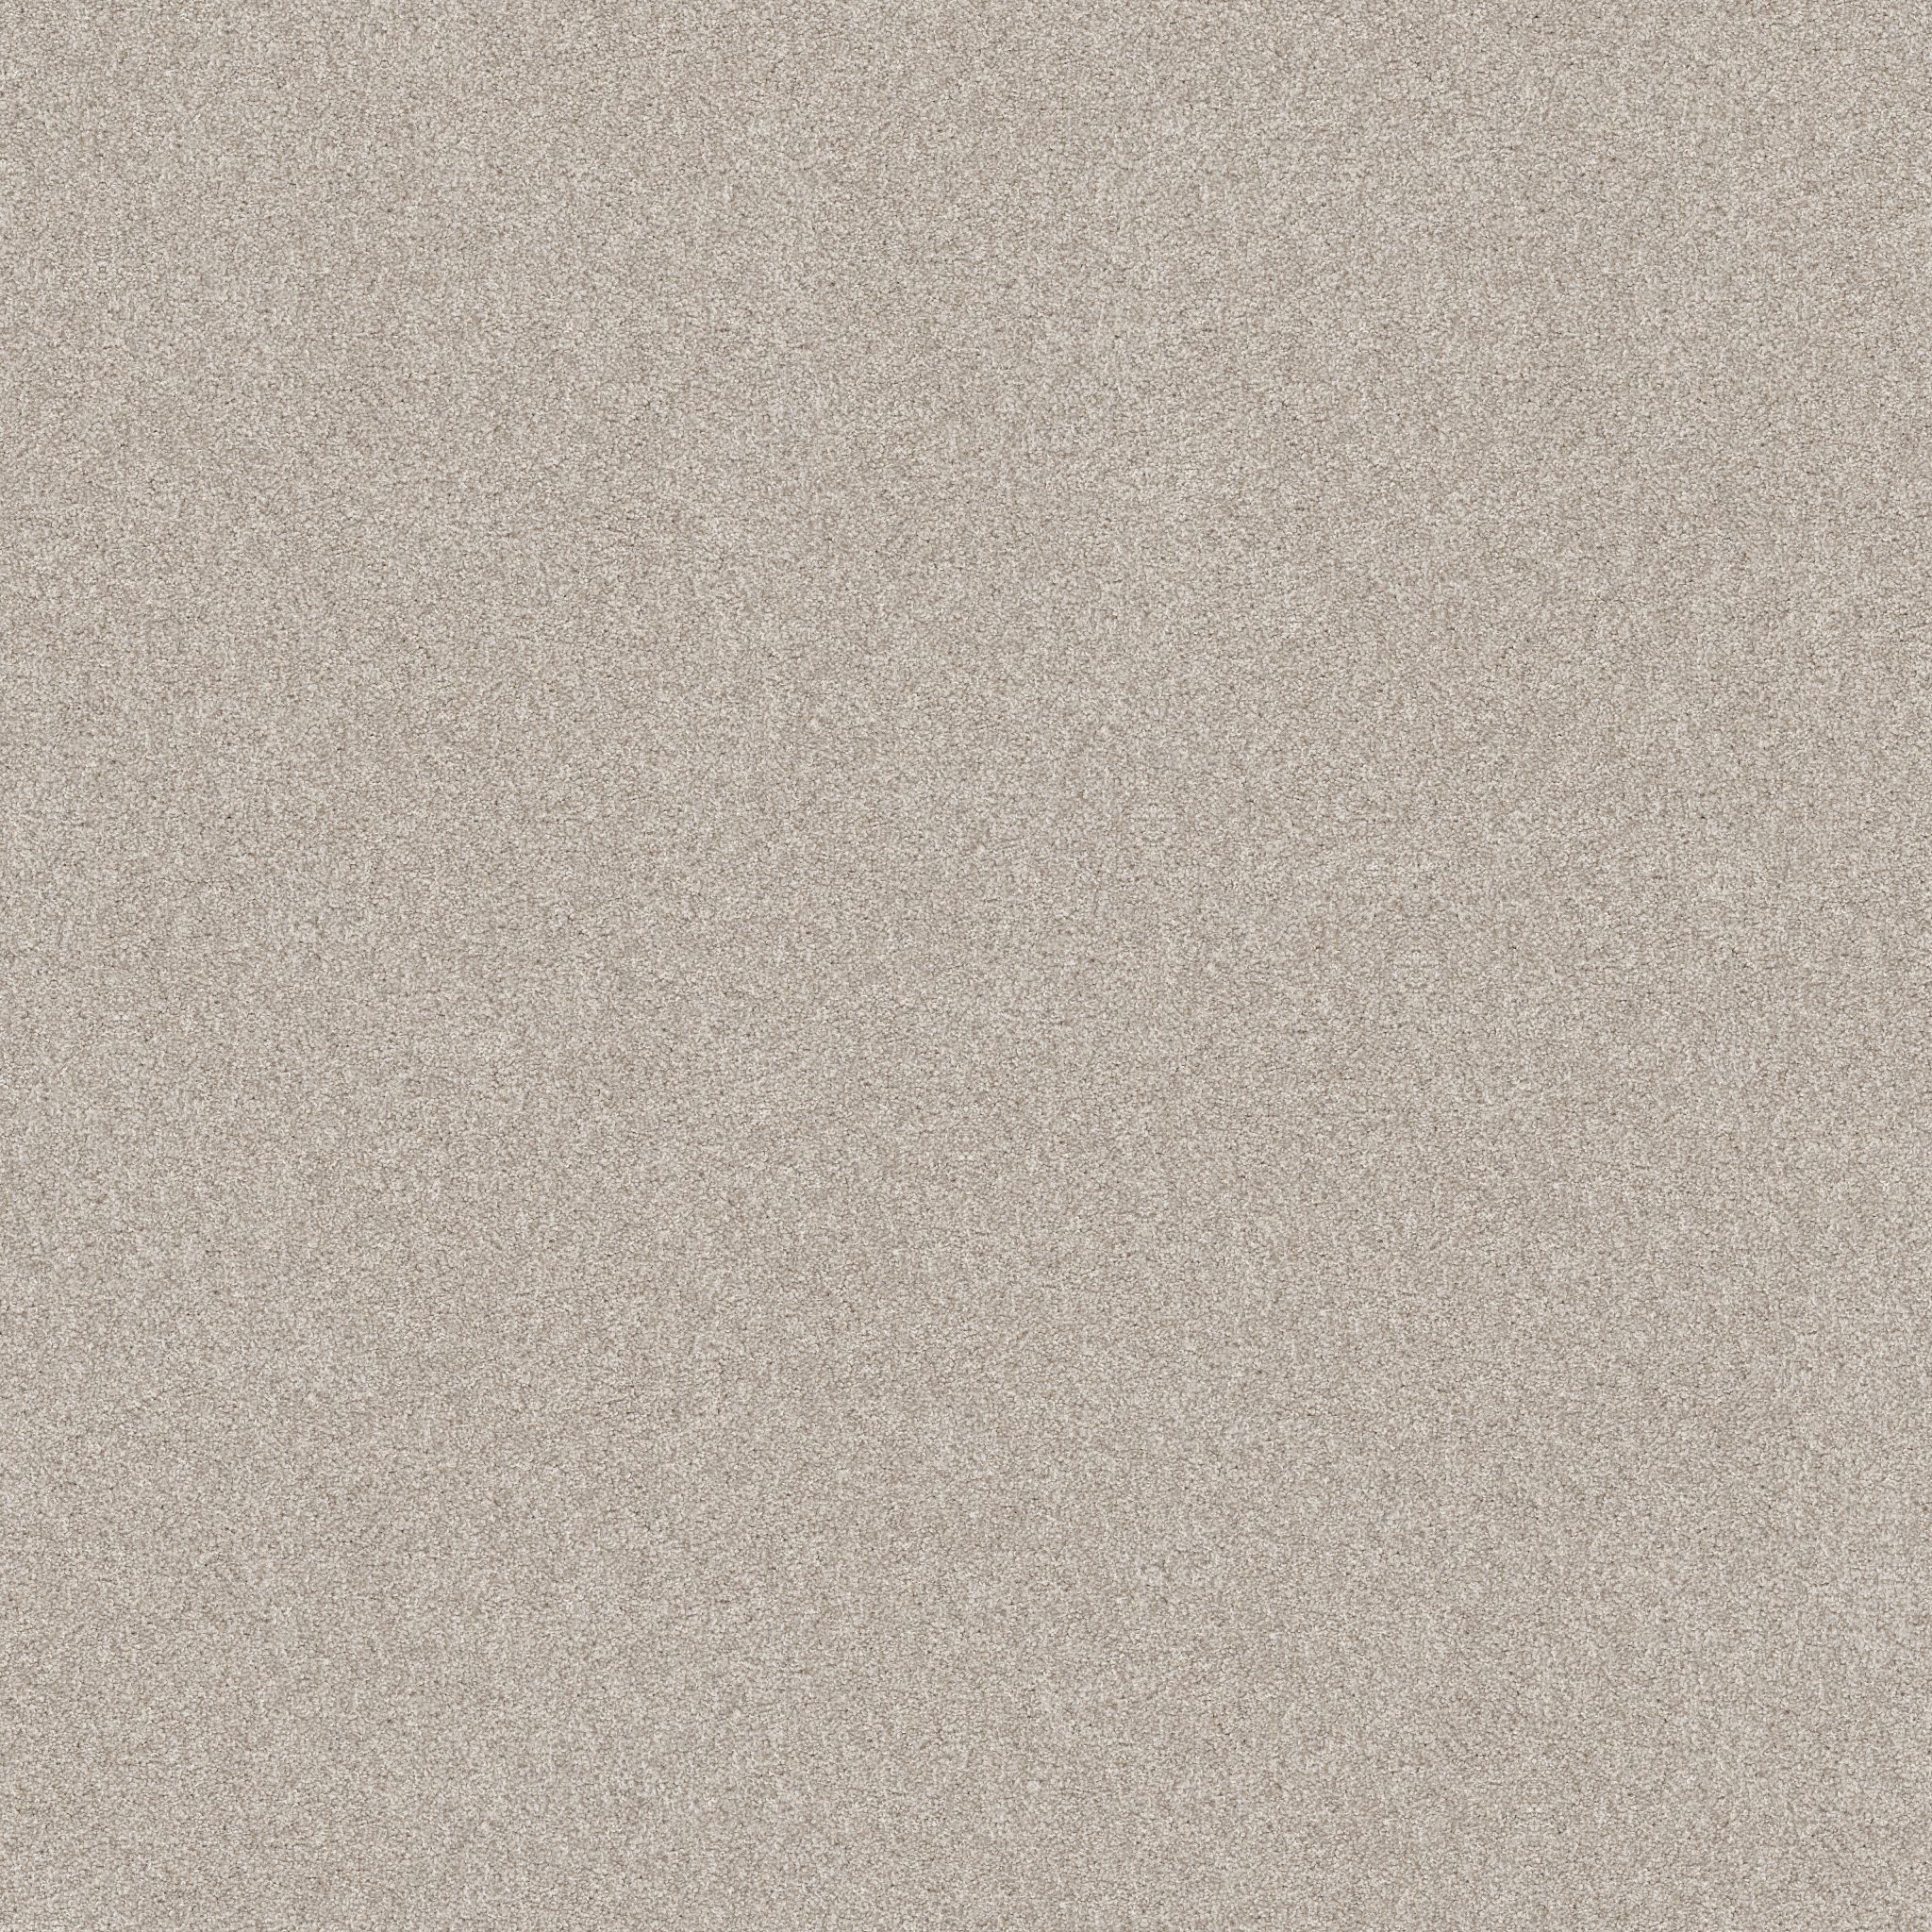 Style name and number: Harmonious I 5E438 and color name and number: Split Sediment 00104